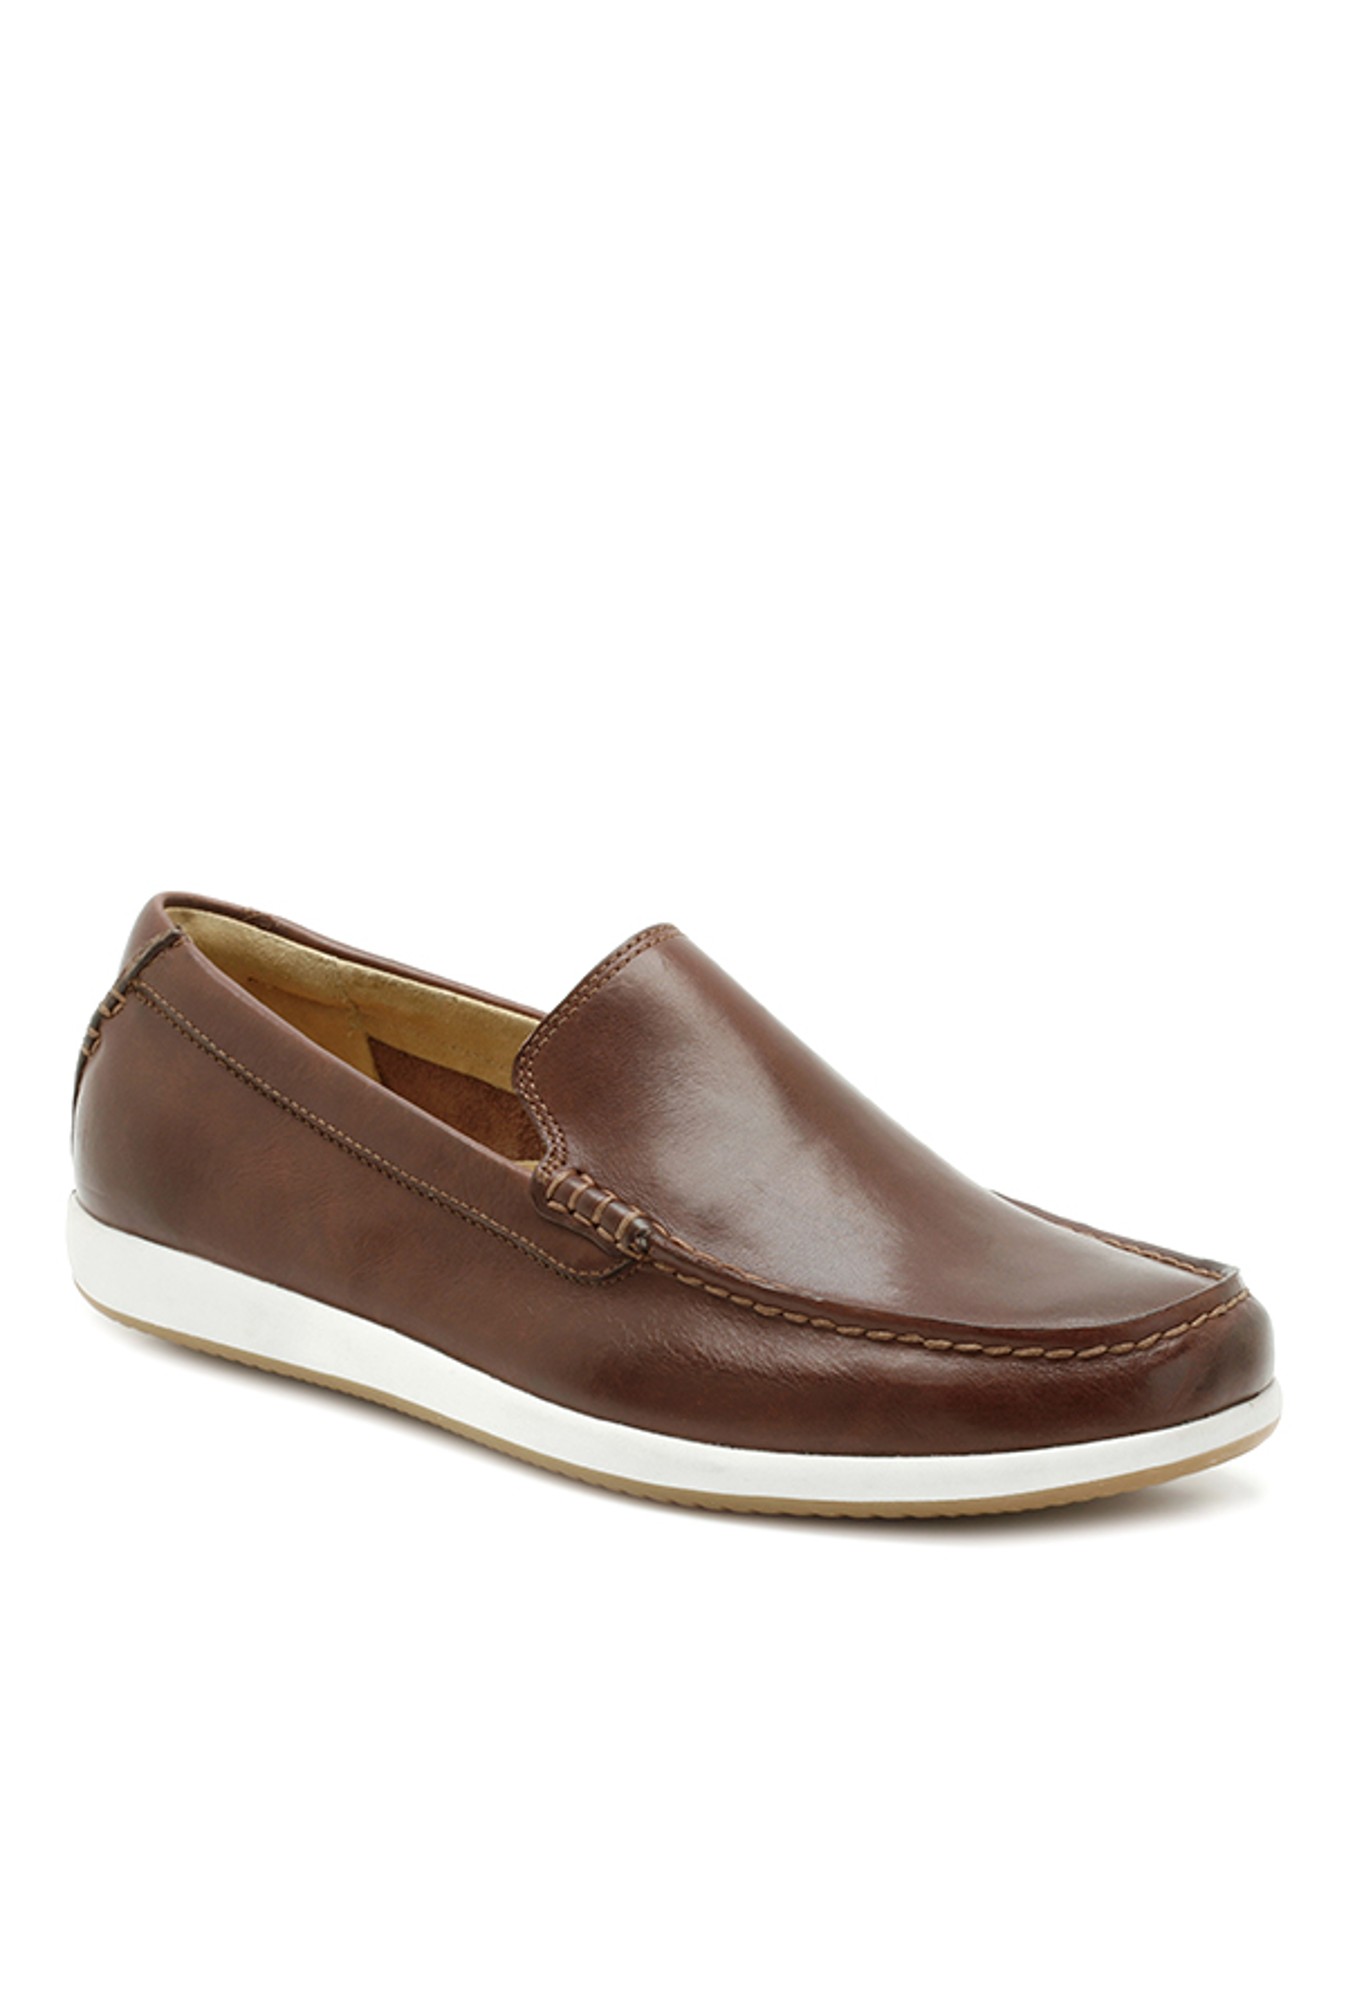 Clarks Newton Drive Chestnut Loafers 